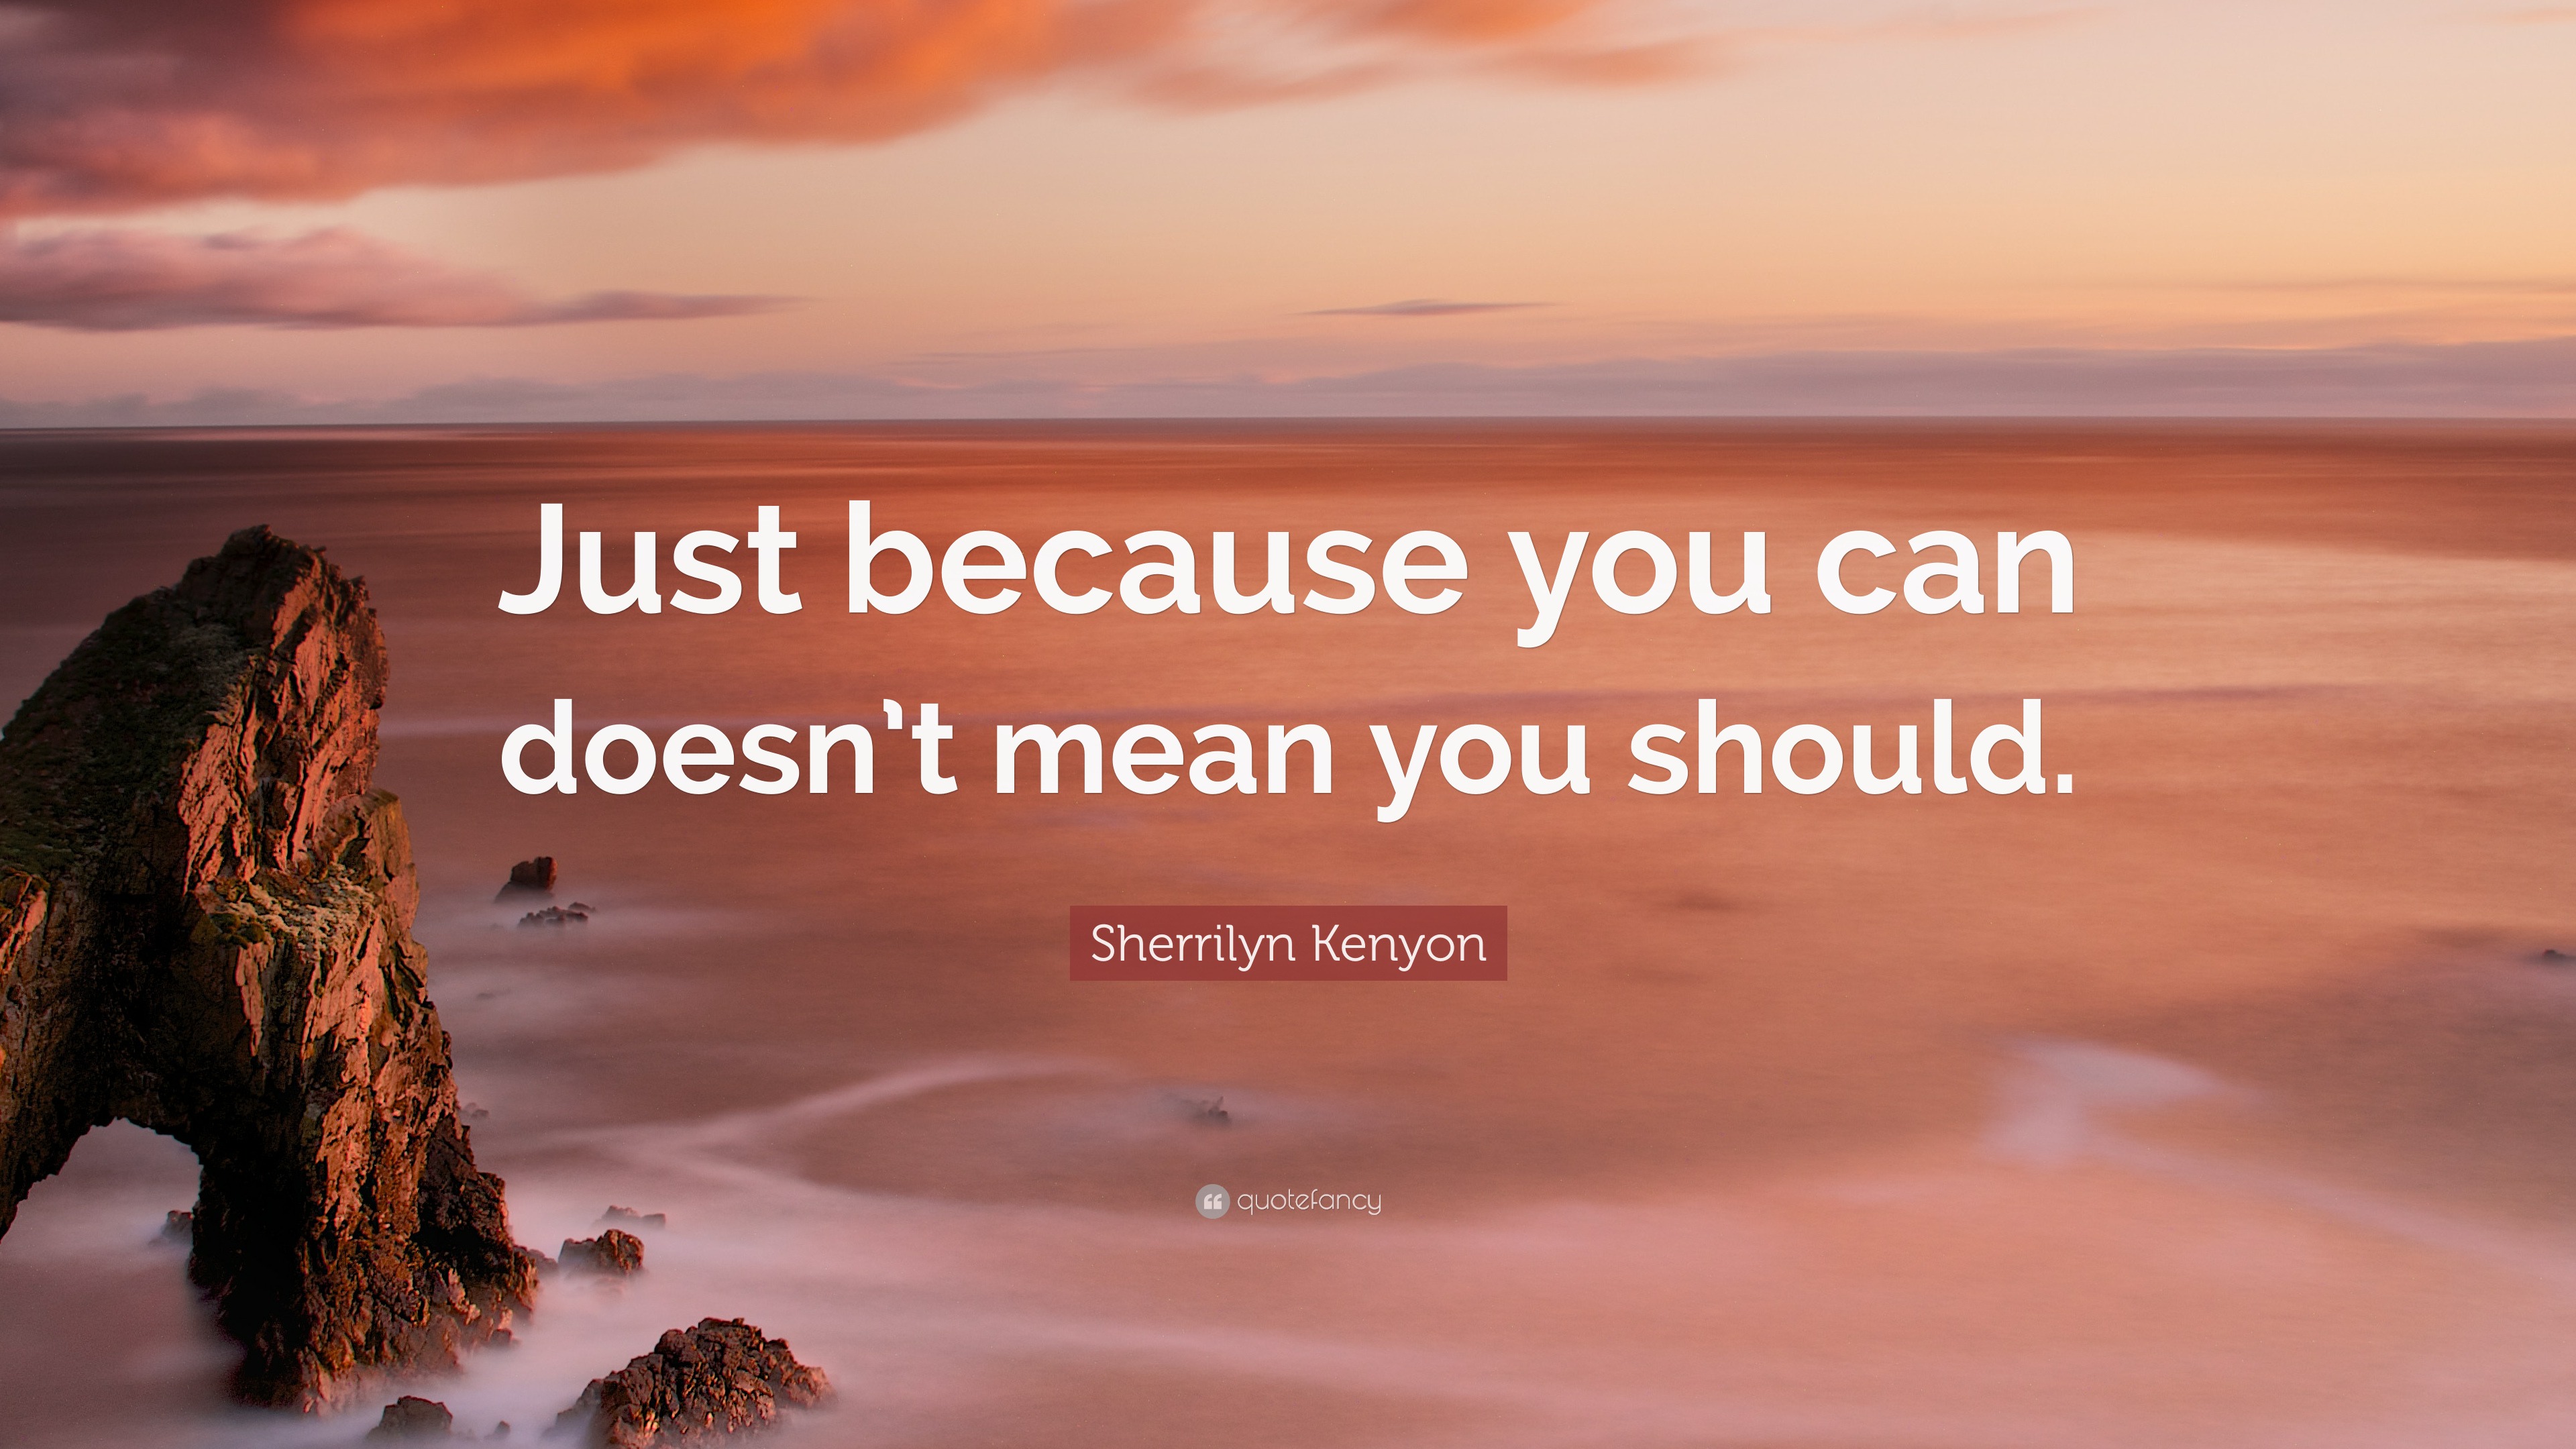 Sherrilyn Kenyon Quote “just Because You Can Doesn’t Mean You Should ”